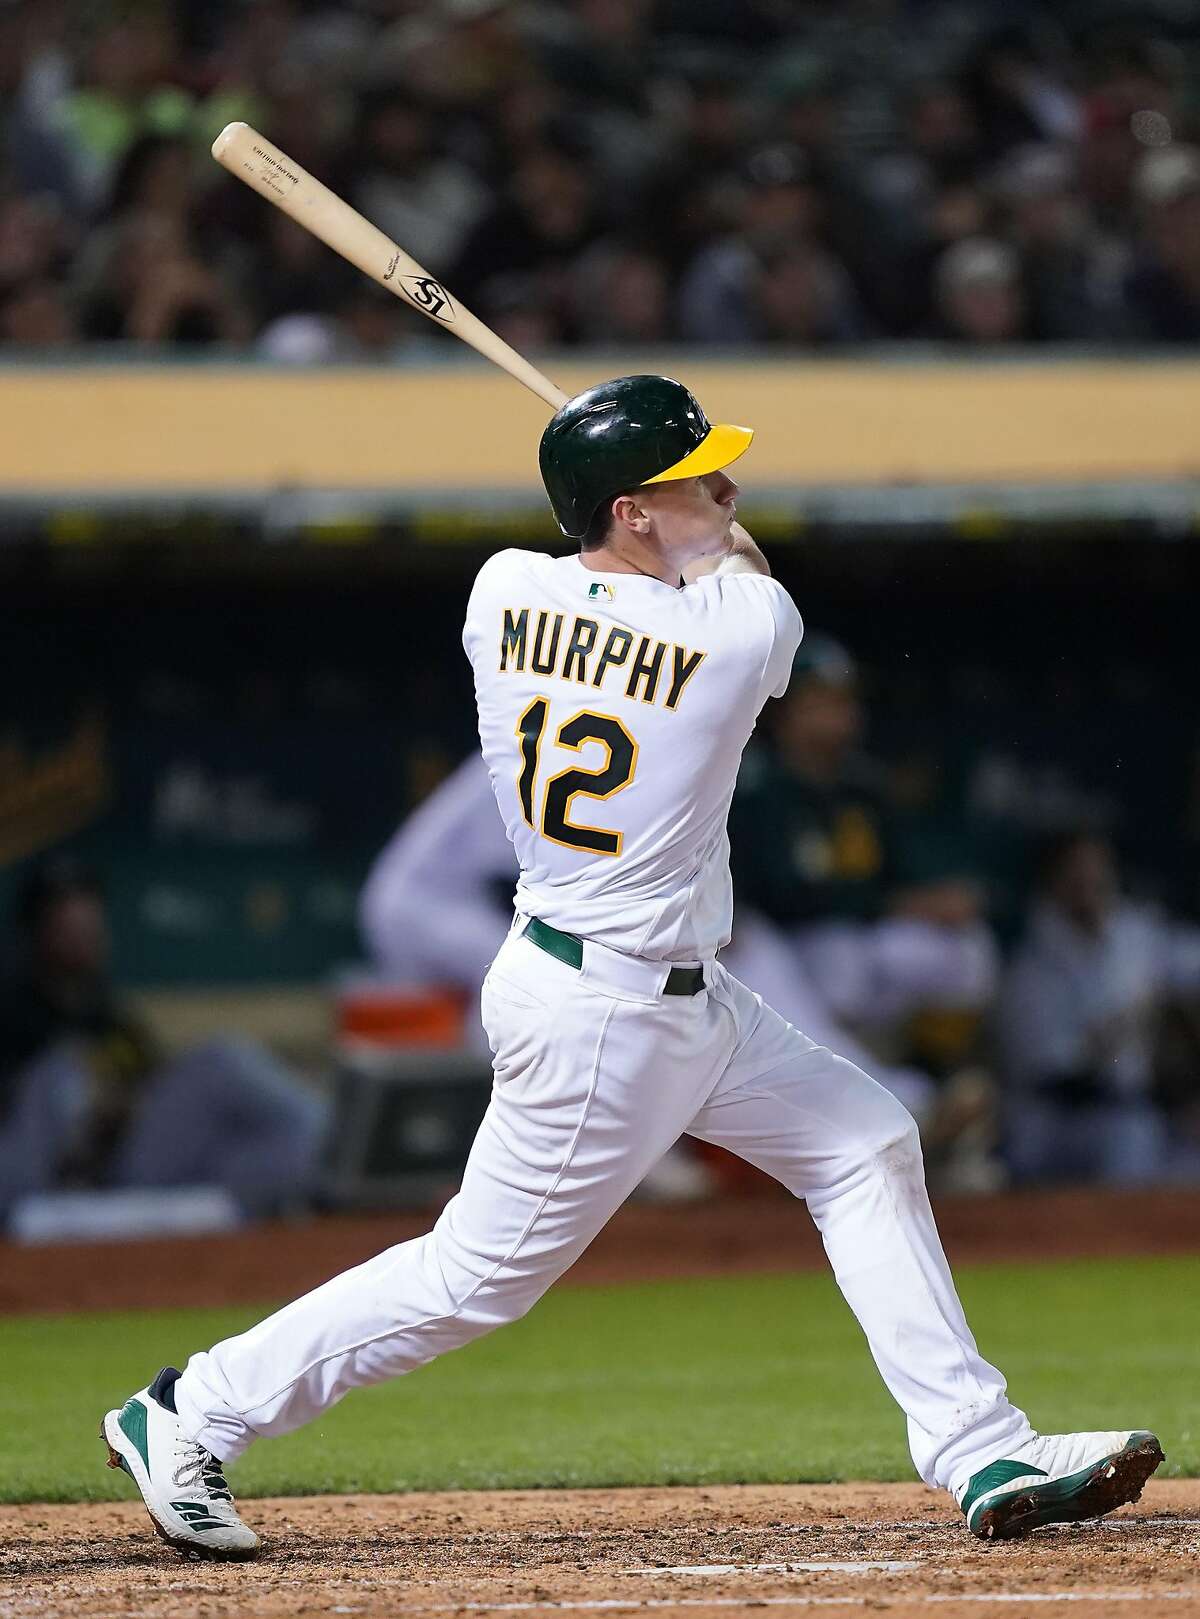 OAKLAND, CALIFORNIA - SEPTEMBER 04: Sean Murphy #12 of the Oakland Athletics during his Major League debut hits a solo home run against the Los Angeles Angels of Anaheim in the bottom of the fifth inning at Ring Central Coliseum on September 04, 2019 in Oakland, California. The home run was is first Major League hit. (Photo by Thearon W. Henderson/Getty Images)